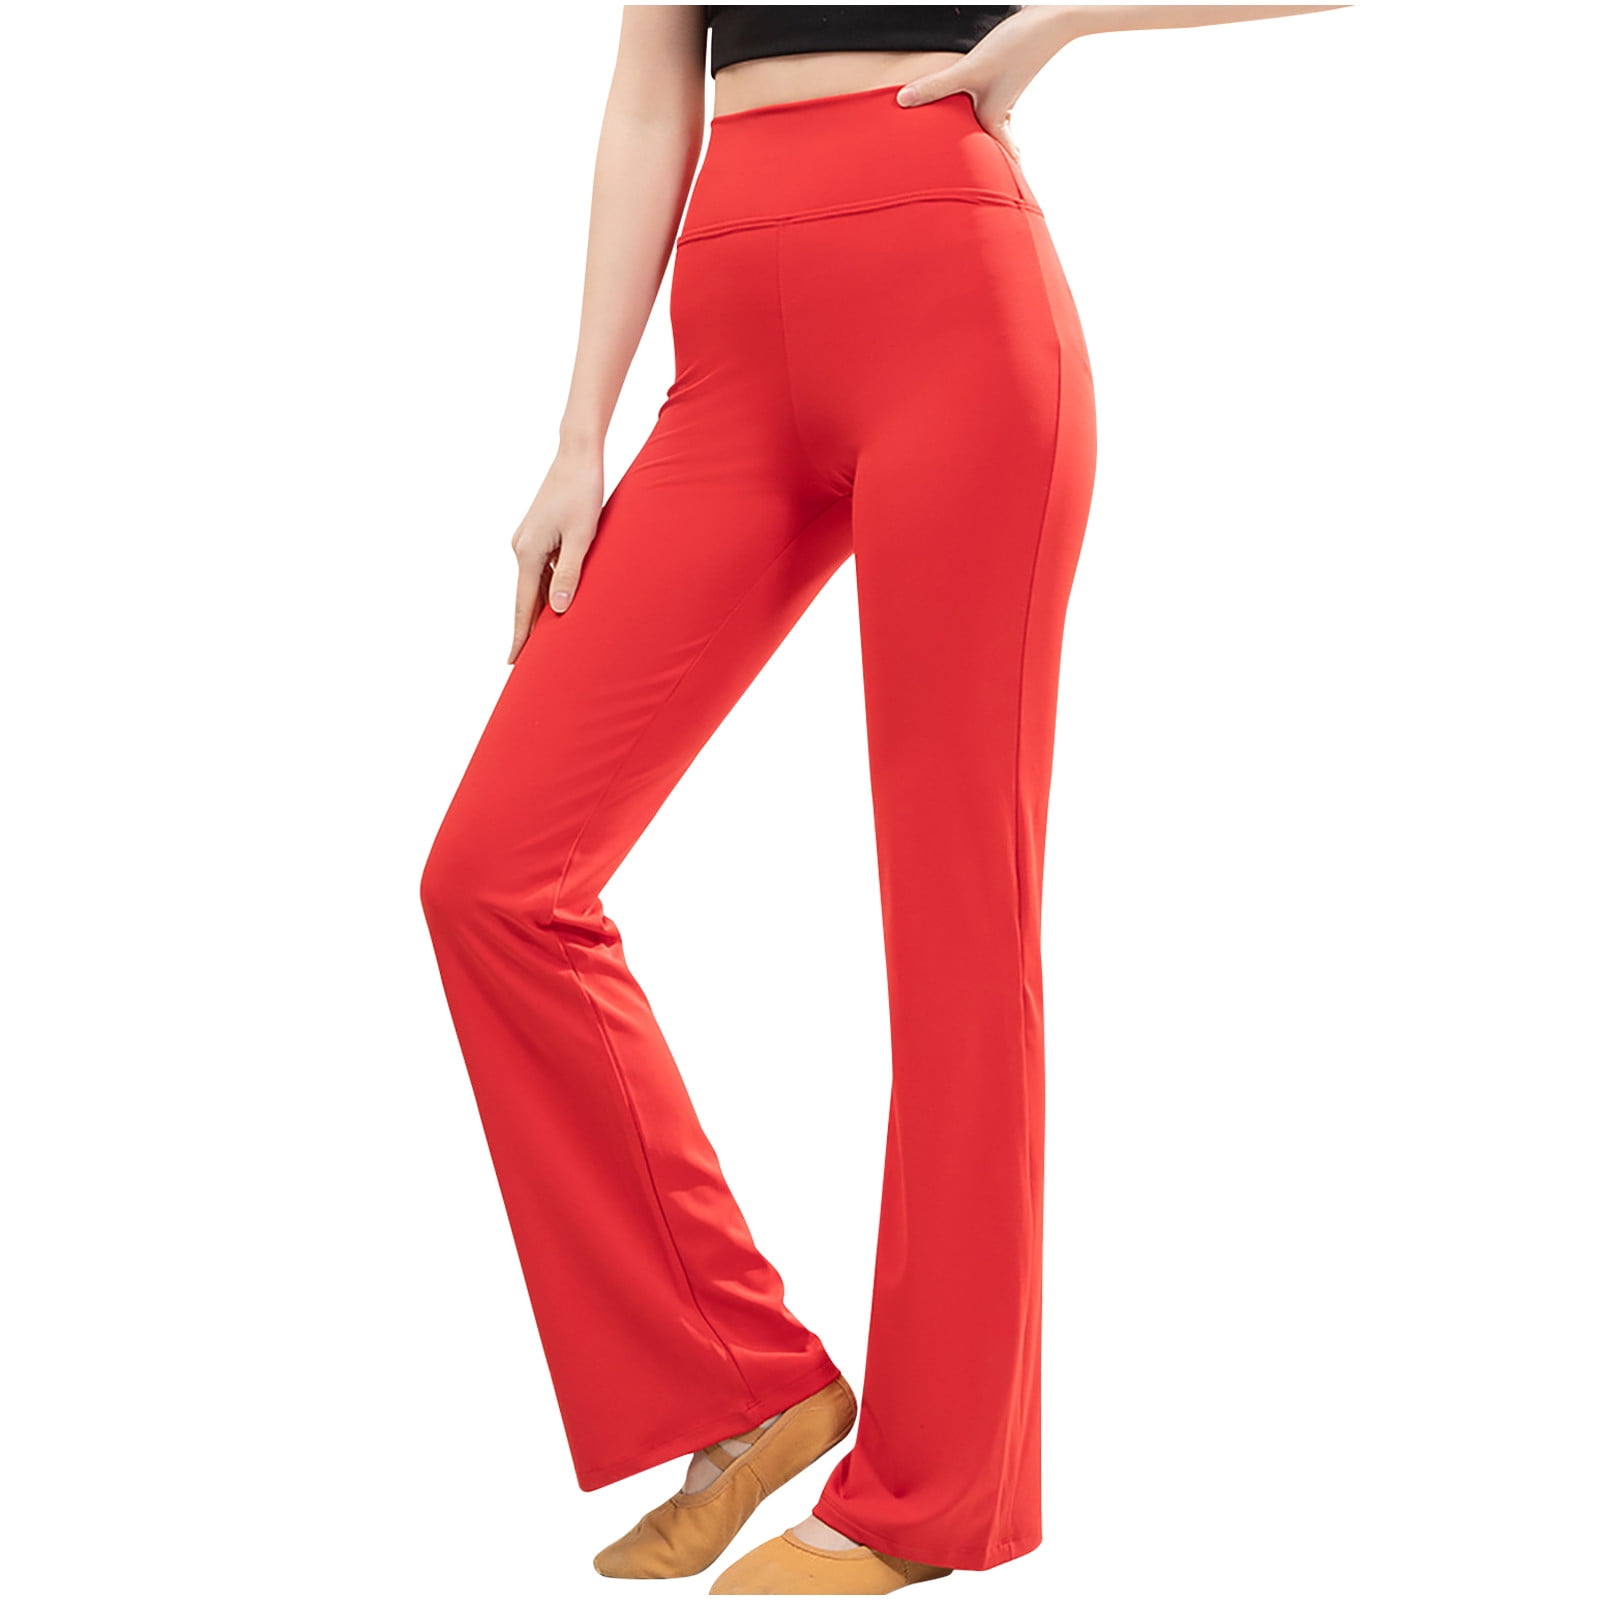 Reduce Price Hfyihgf Bootcut Yoga Pants for Women High Waist Dress Pants  Bootleg Workout Pant Stylish Flared Leggings for Casual Work(Red,XXL) 